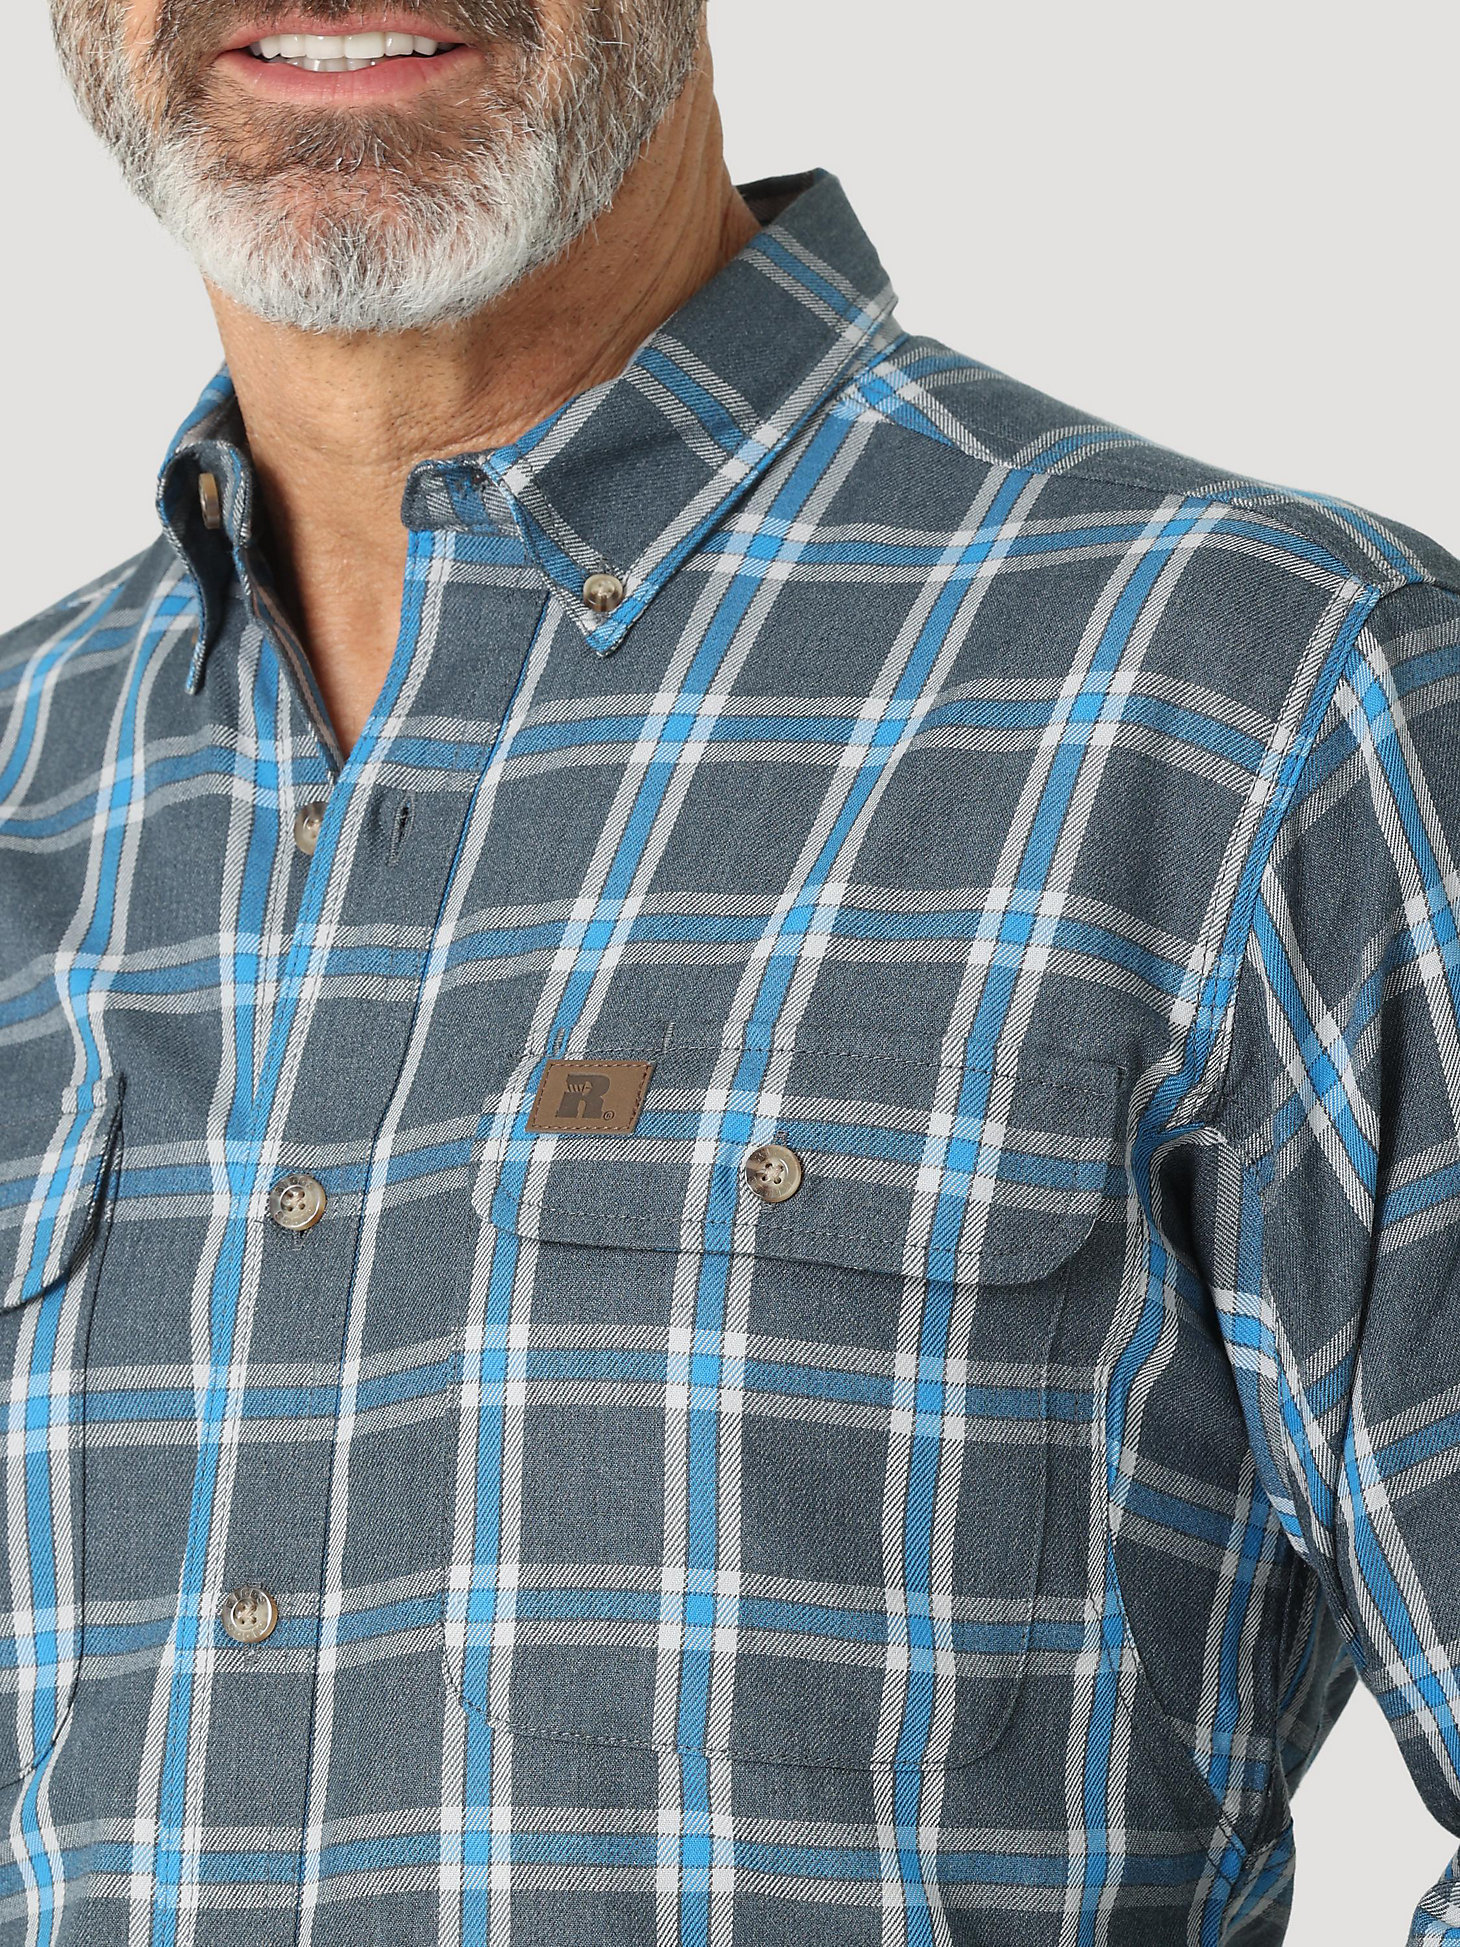 Wrangler® RIGGS Workwear® Long Sleeve Plaid Work Shirt in Downpour alternative view 2